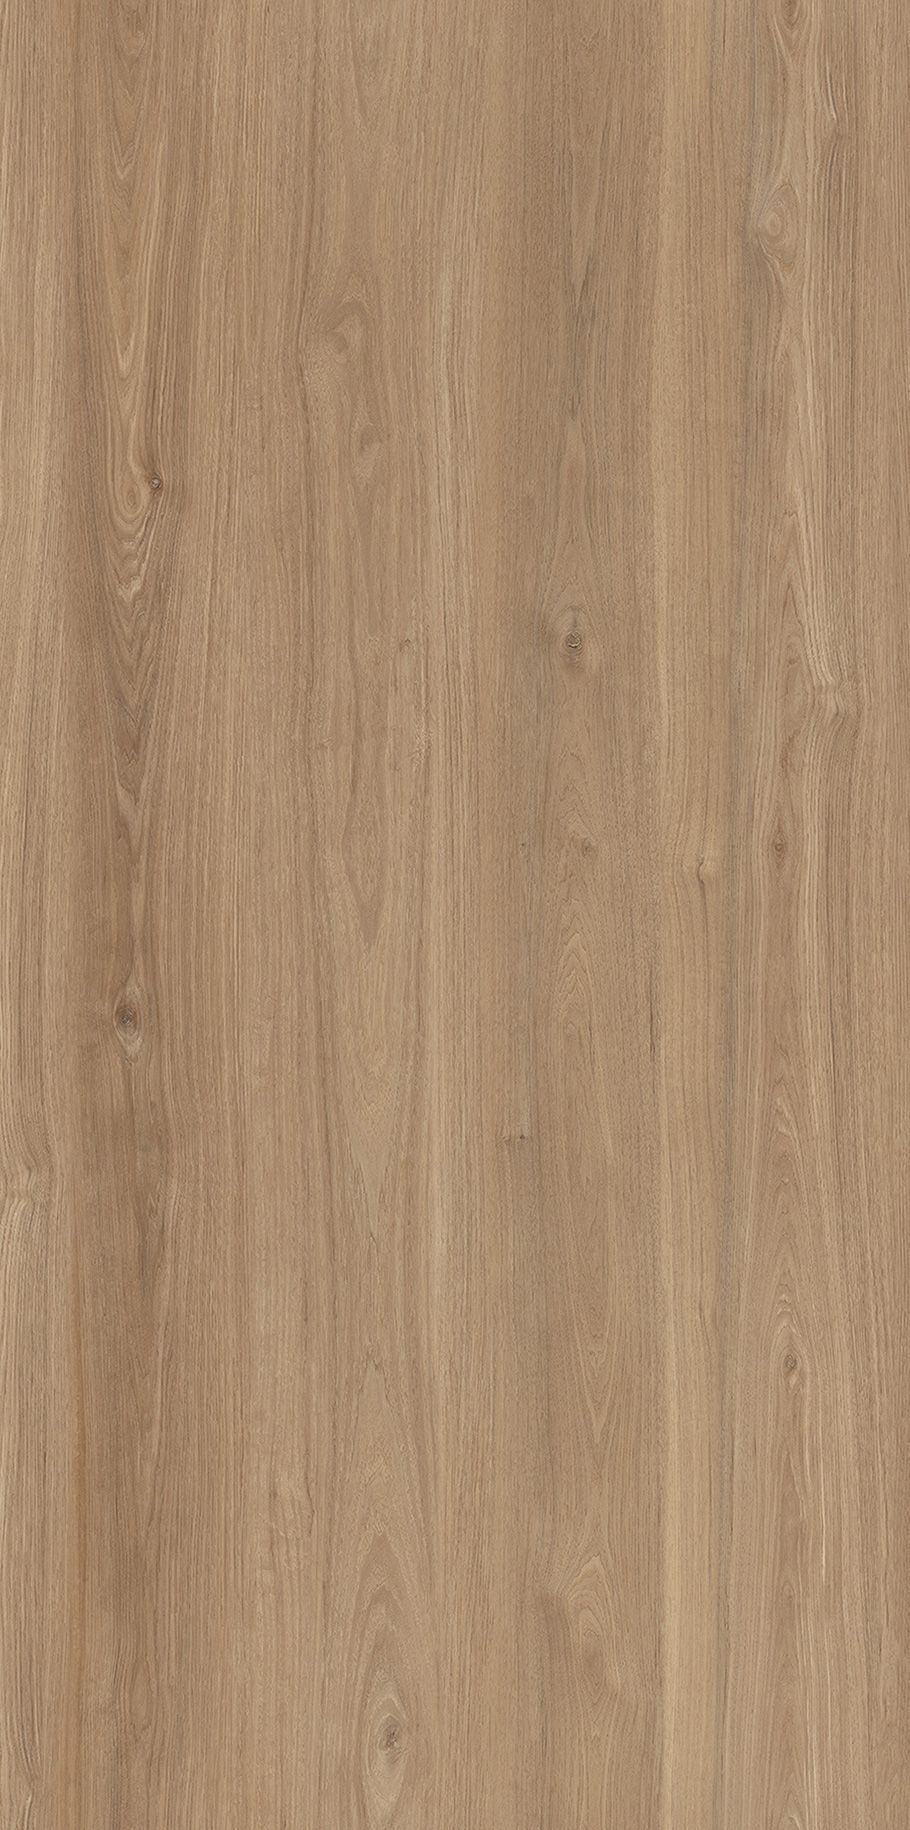 Oak Wood : The beauty and versatility of oak wood for your home and beyond